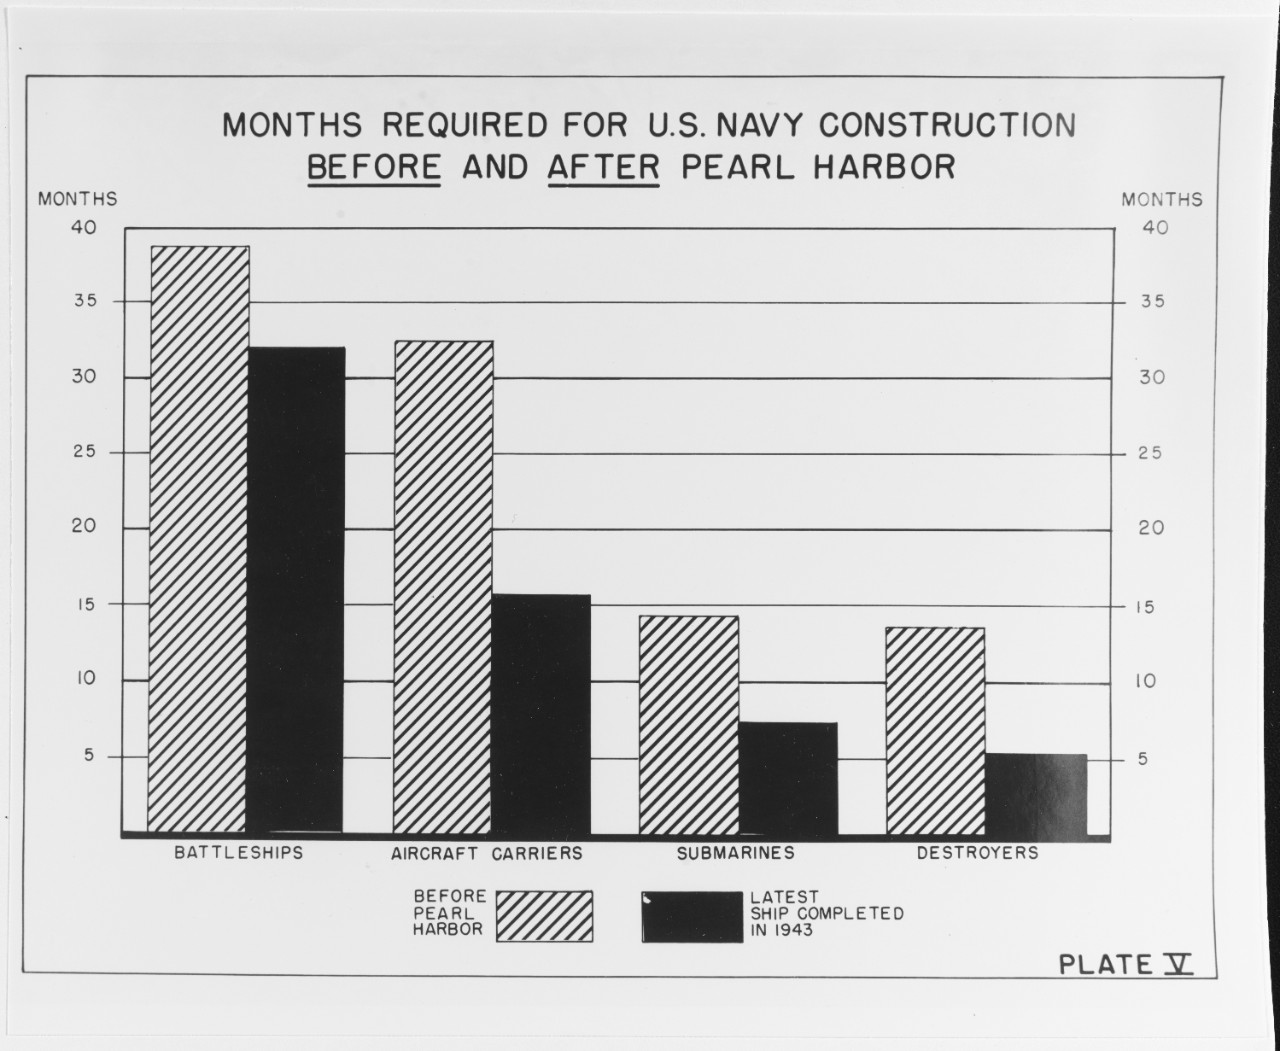 "Months required for U.S. Navy construction before and after Pearl Harbor"